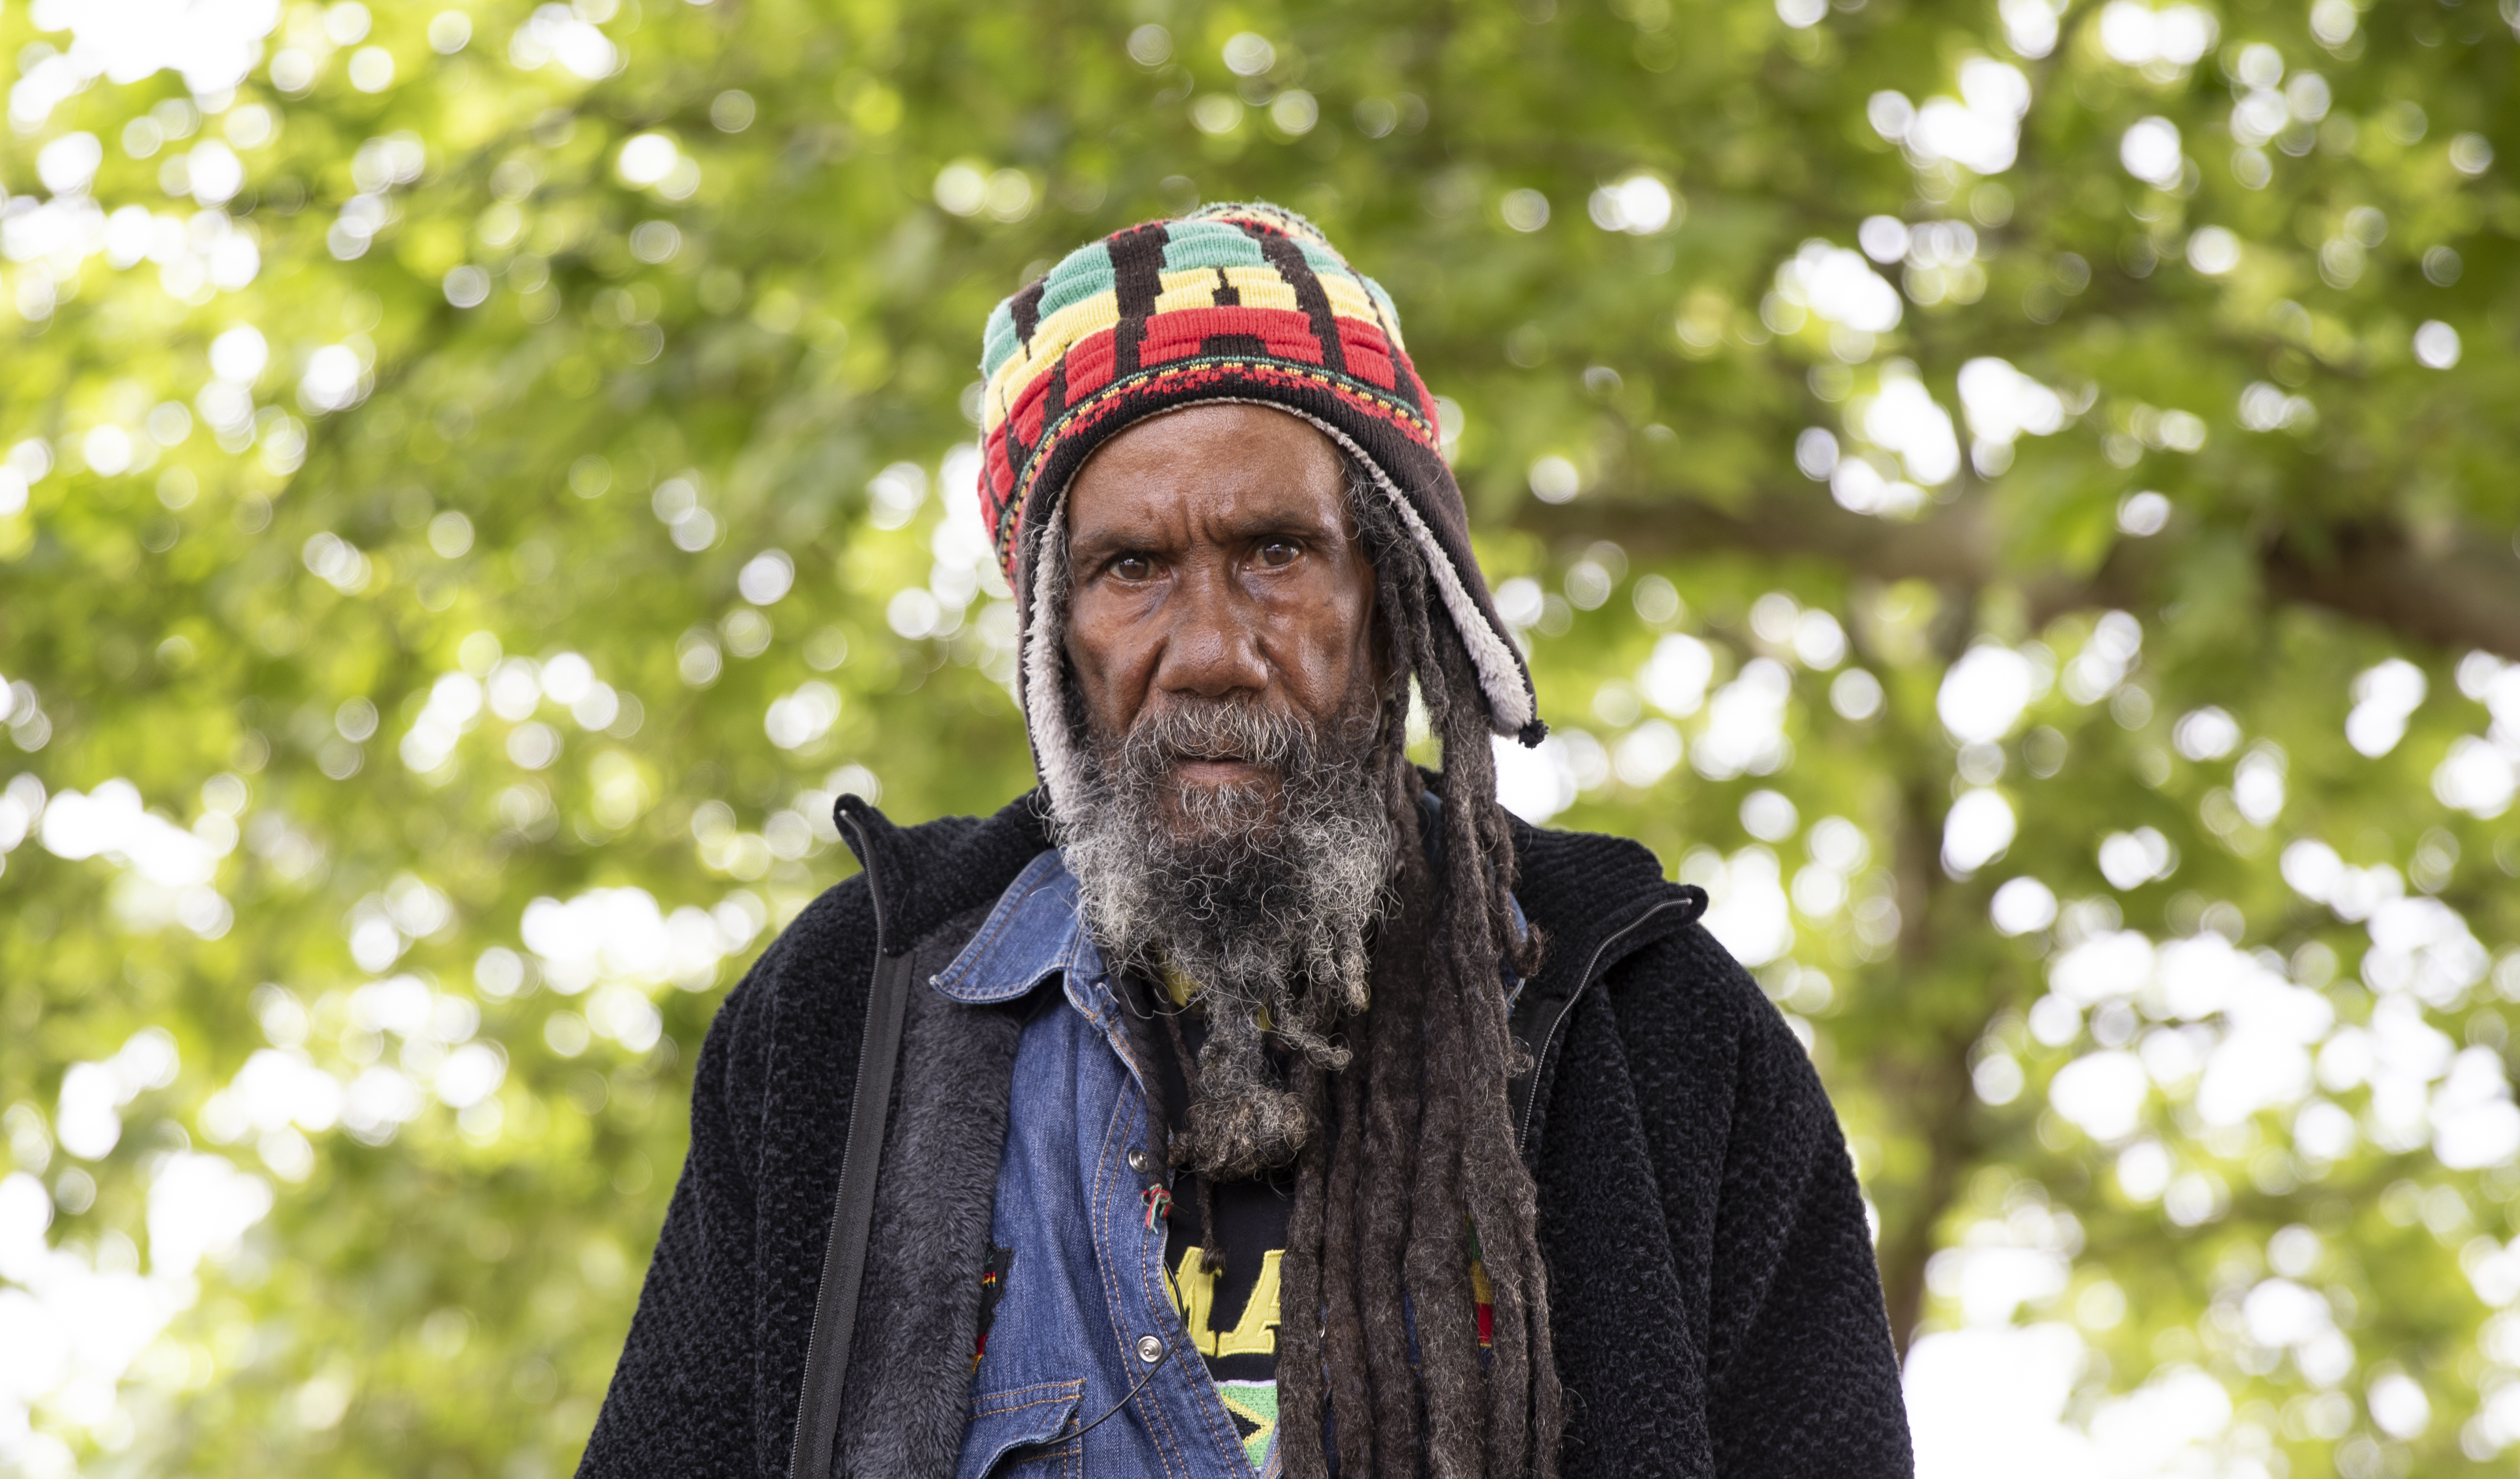 Barry the Beekeeper has long black dreads and a long grey beard wearing a knitted Pan Africa trapper hat and a jean jacket. Behind him are out of focus branches with green leaves.